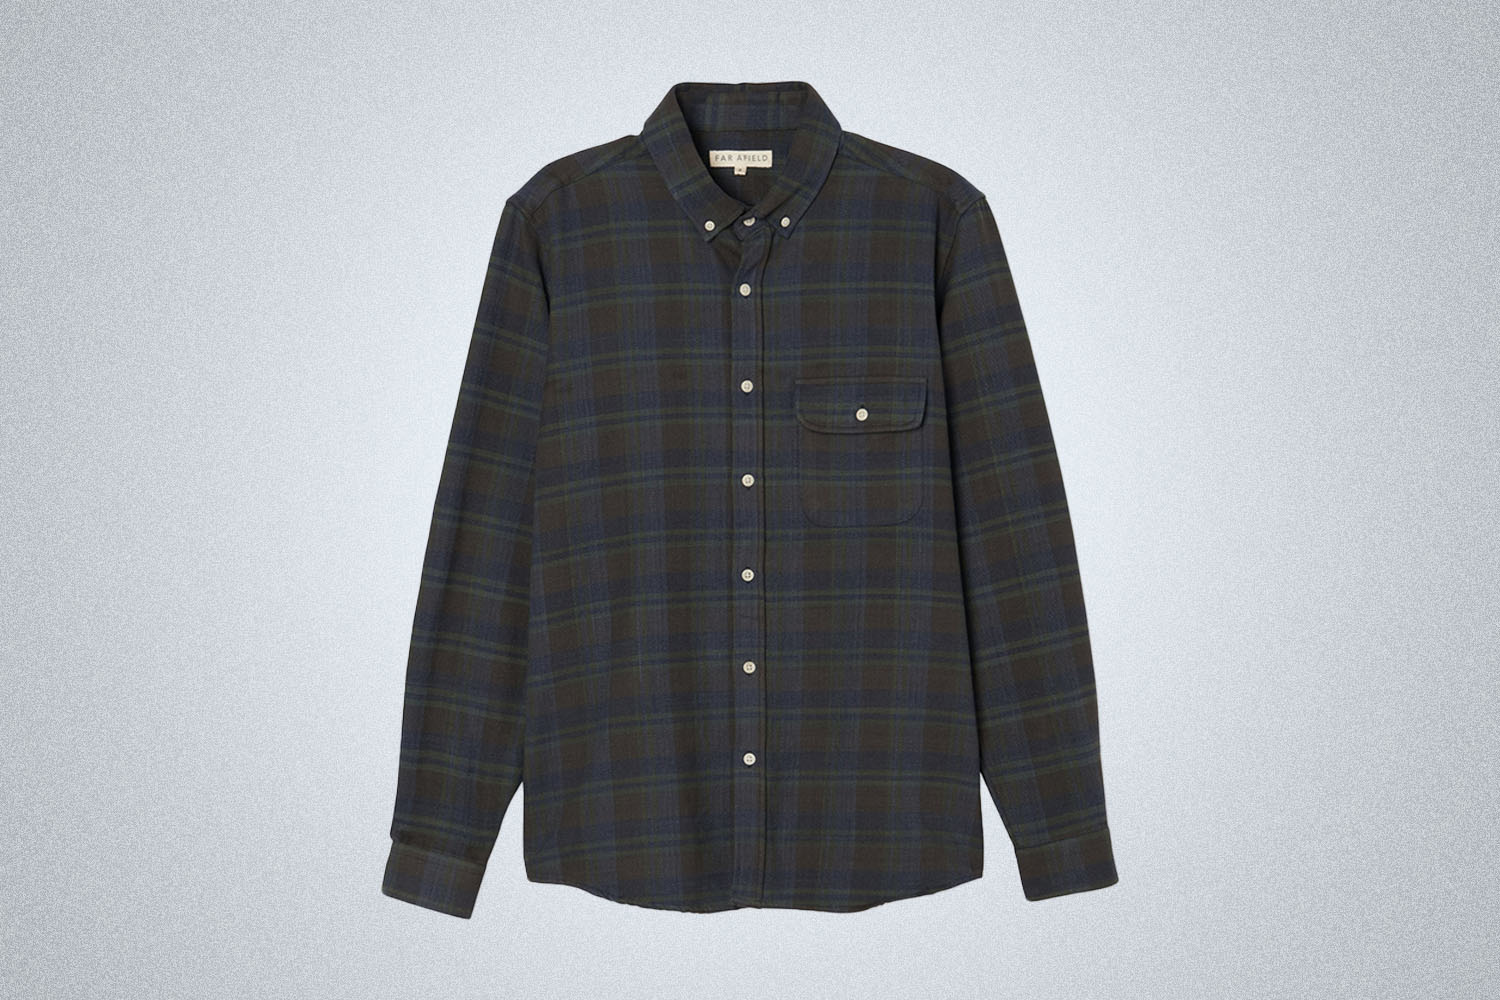 a checked dark and grey button down